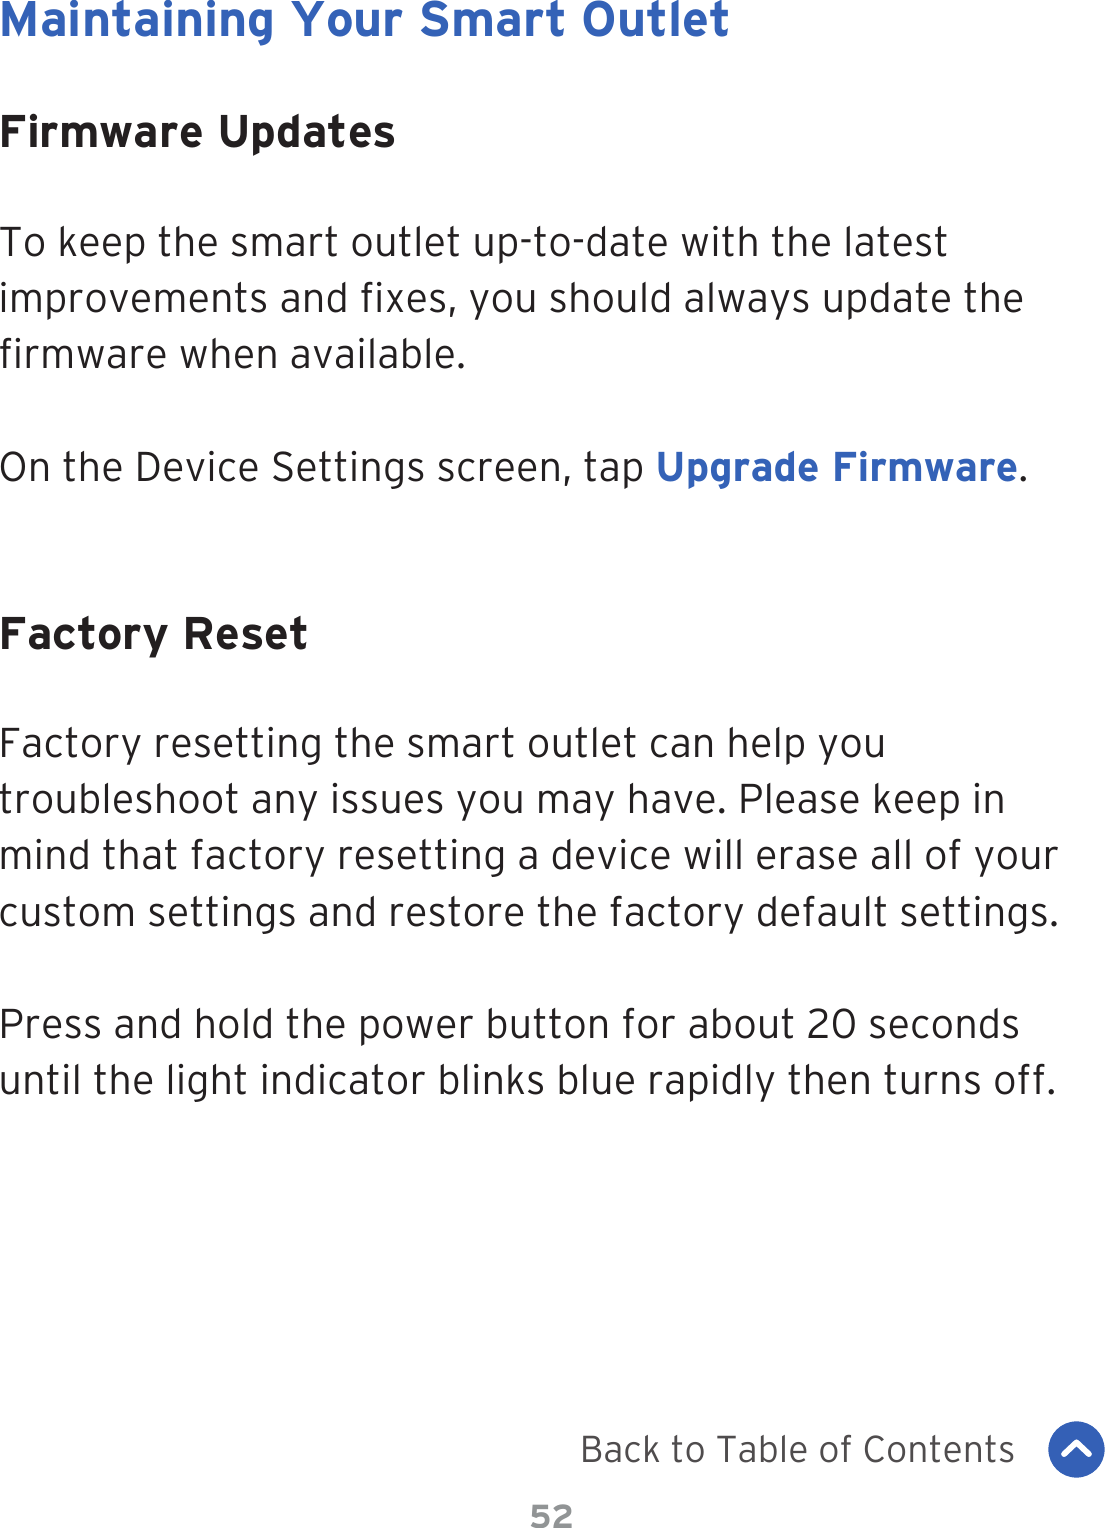 52Maintaining Your Smart OutletFirmware UpdatesFactory ResetTo keep the smart outlet up-to-date with the latest improvements and xes, you should always update the rmware when available.On the Device Settings screen, tap Upgrade Firmware.Factory resetting the smart outlet can help you troubleshoot any issues you may have. Please keep in mind that factory resetting a device will erase all of your custom settings and restore the factory default settings.Press and hold the power button for about 20 seconds until the light indicator blinks blue rapidly then turns off.Back to Table of Contents